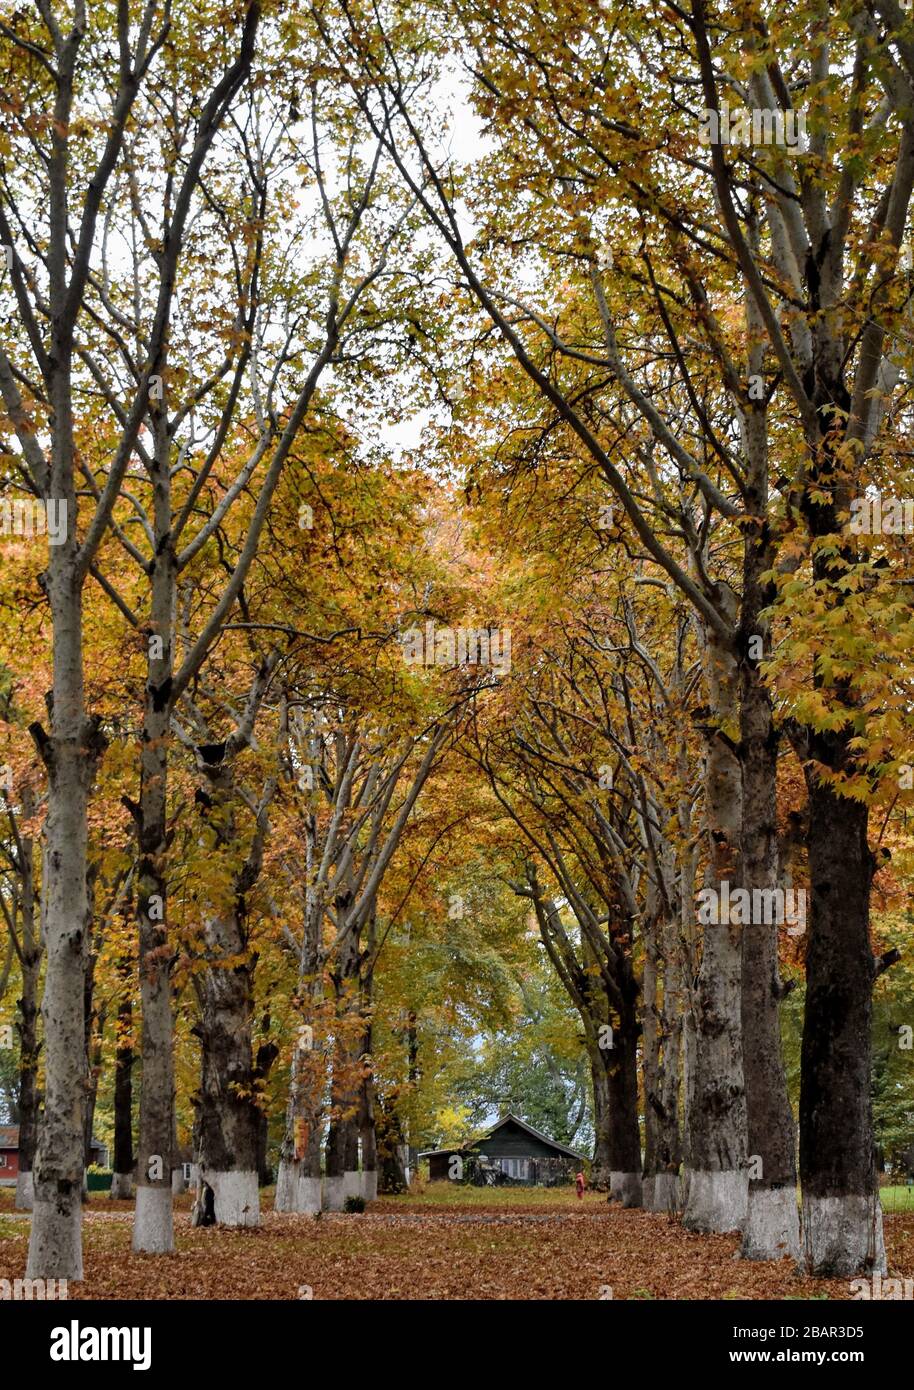 Small house in dense chenar trees in autumn Stock Photo